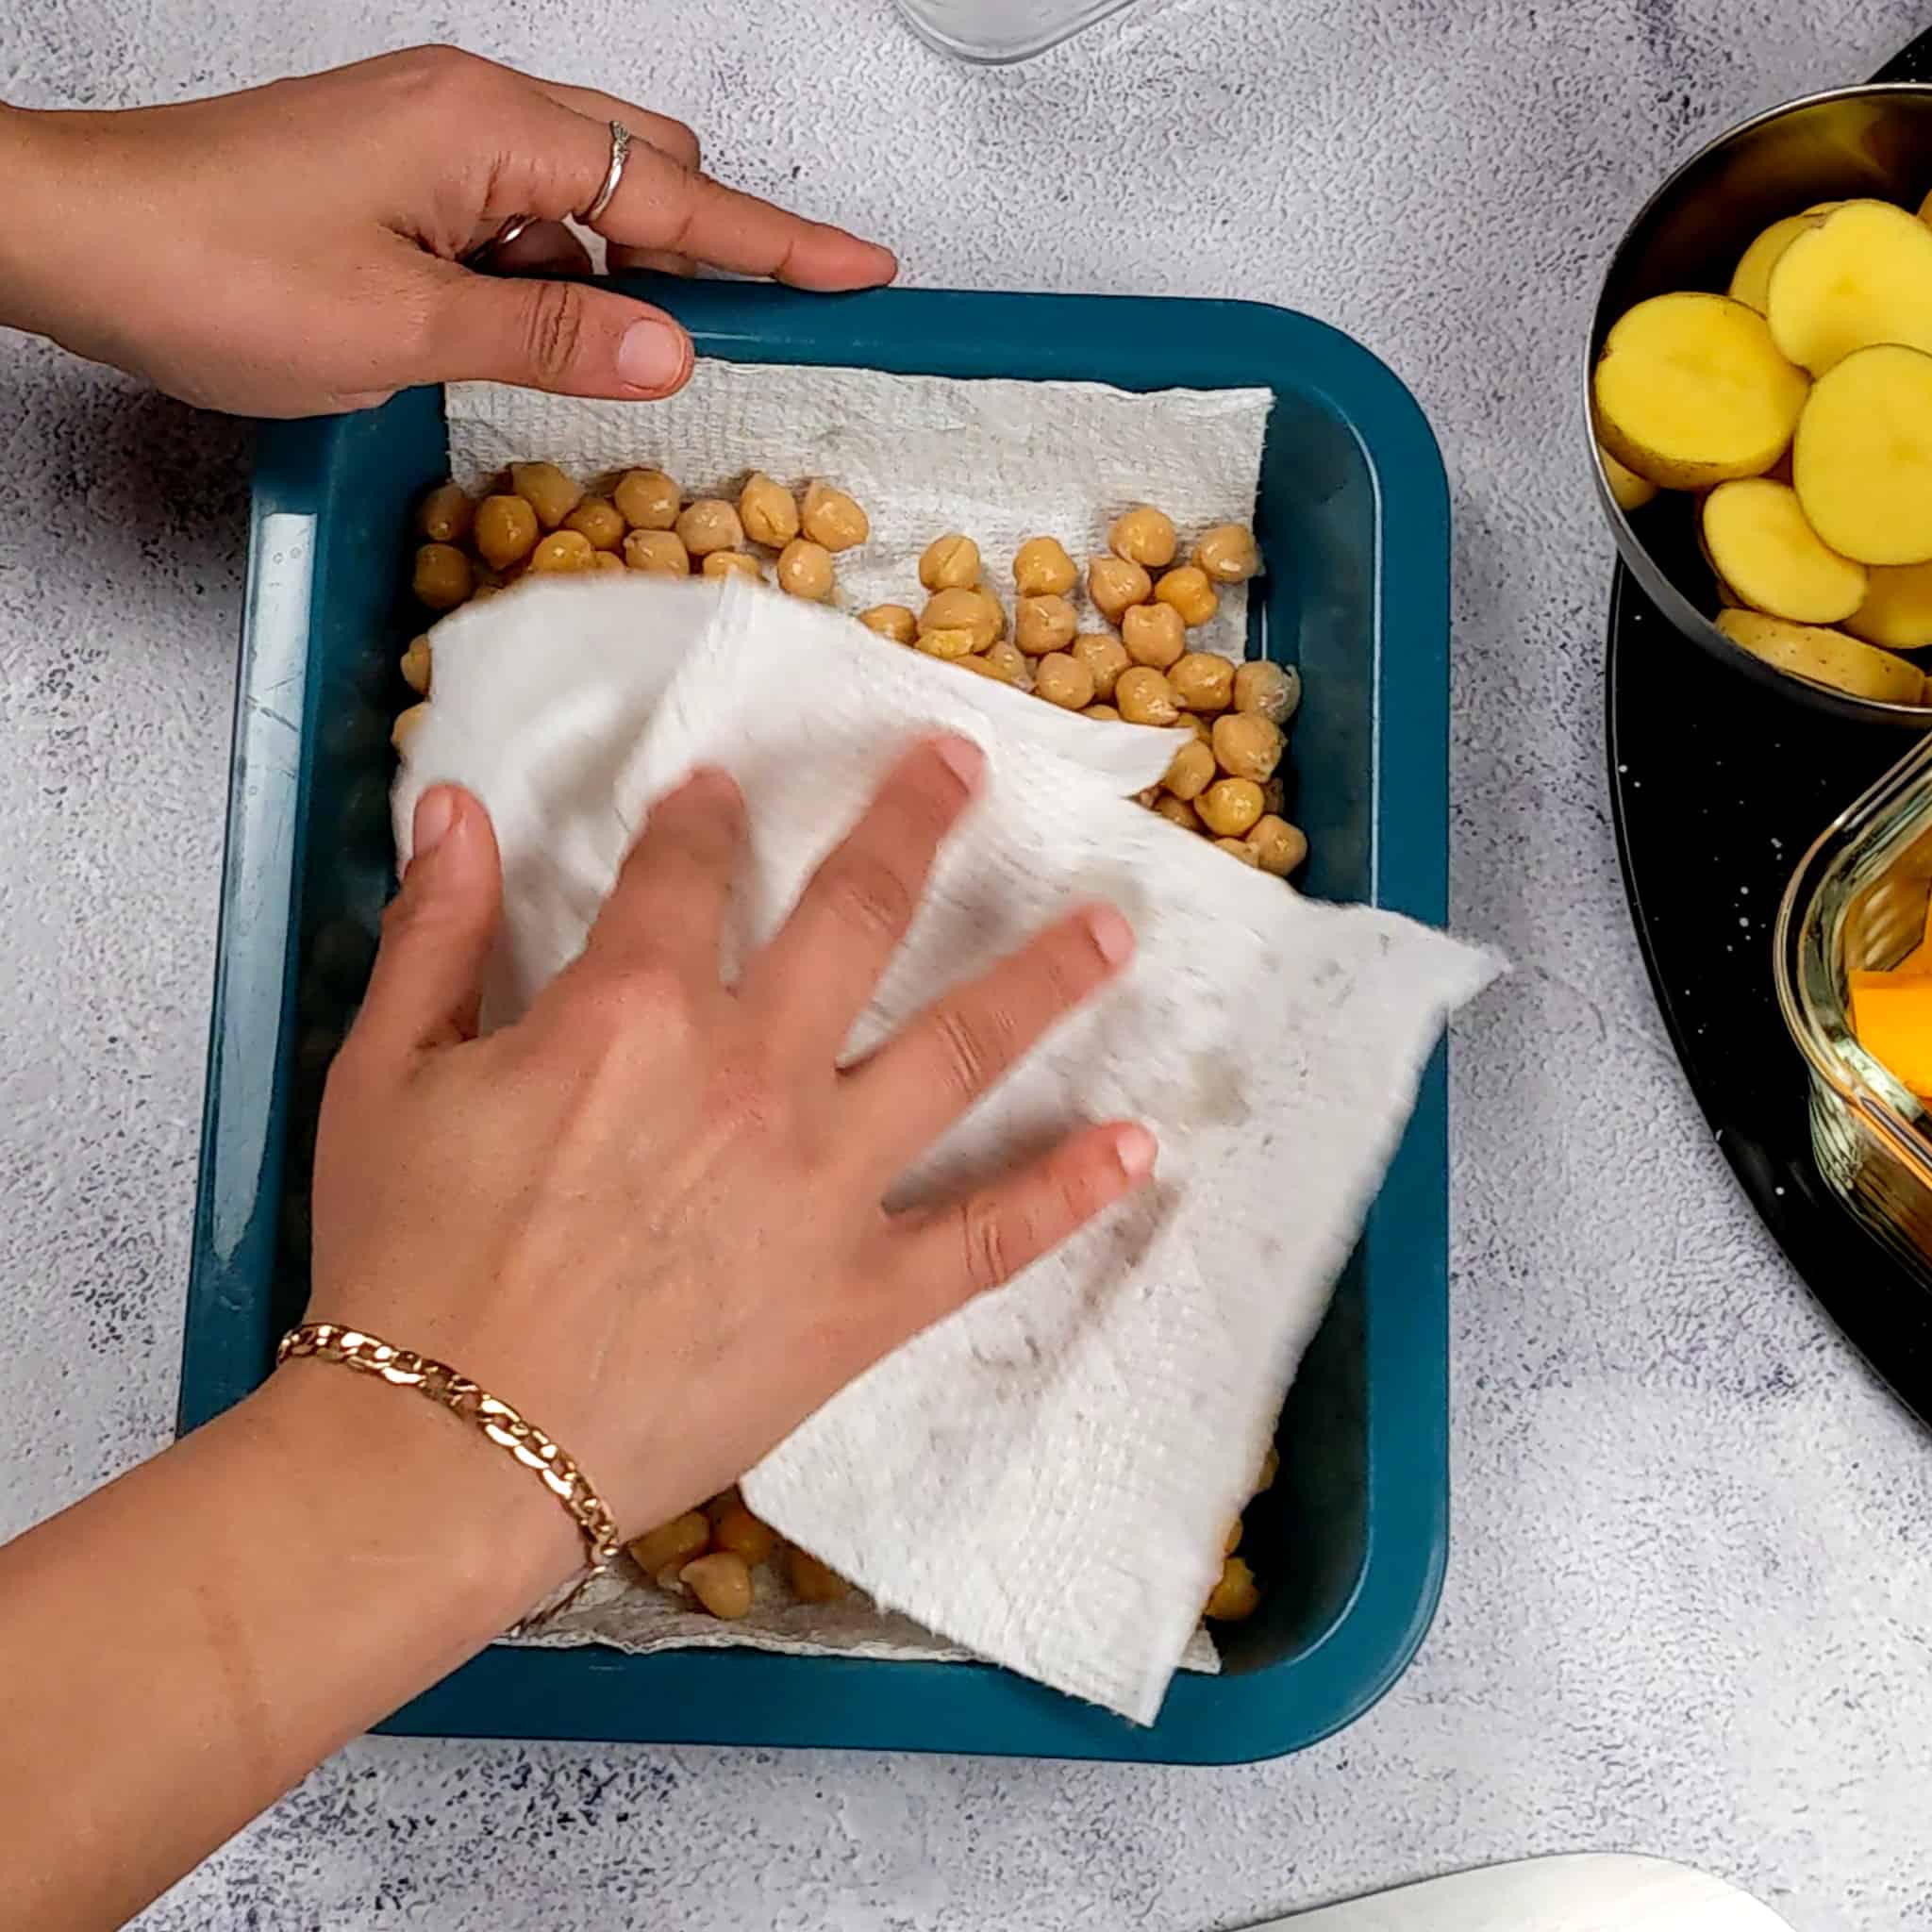 chickpeas sitting on a paper towel in a rectangular plastic container being dried off with a paper towel